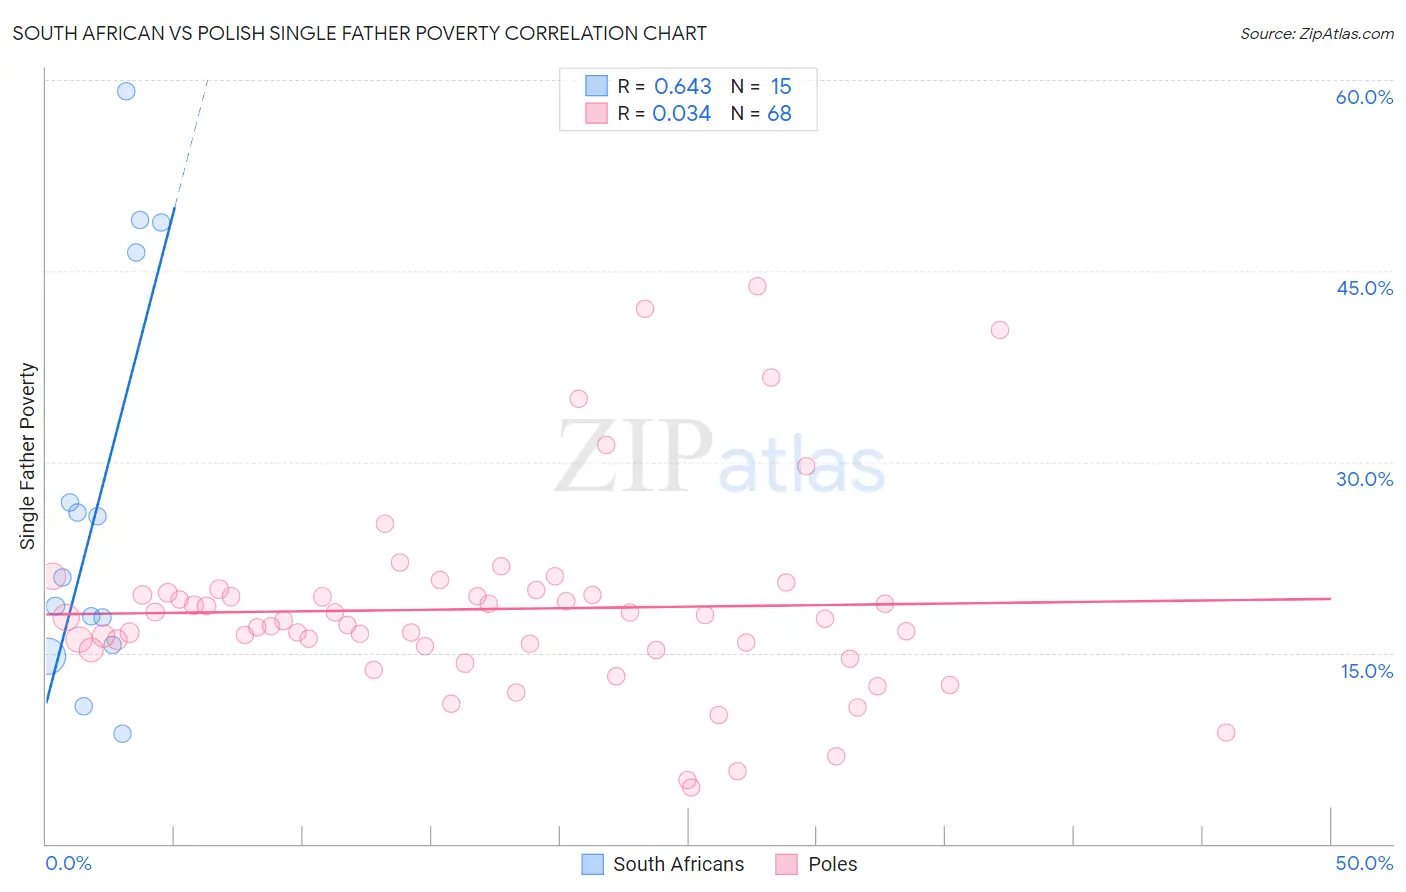 South African vs Polish Single Father Poverty